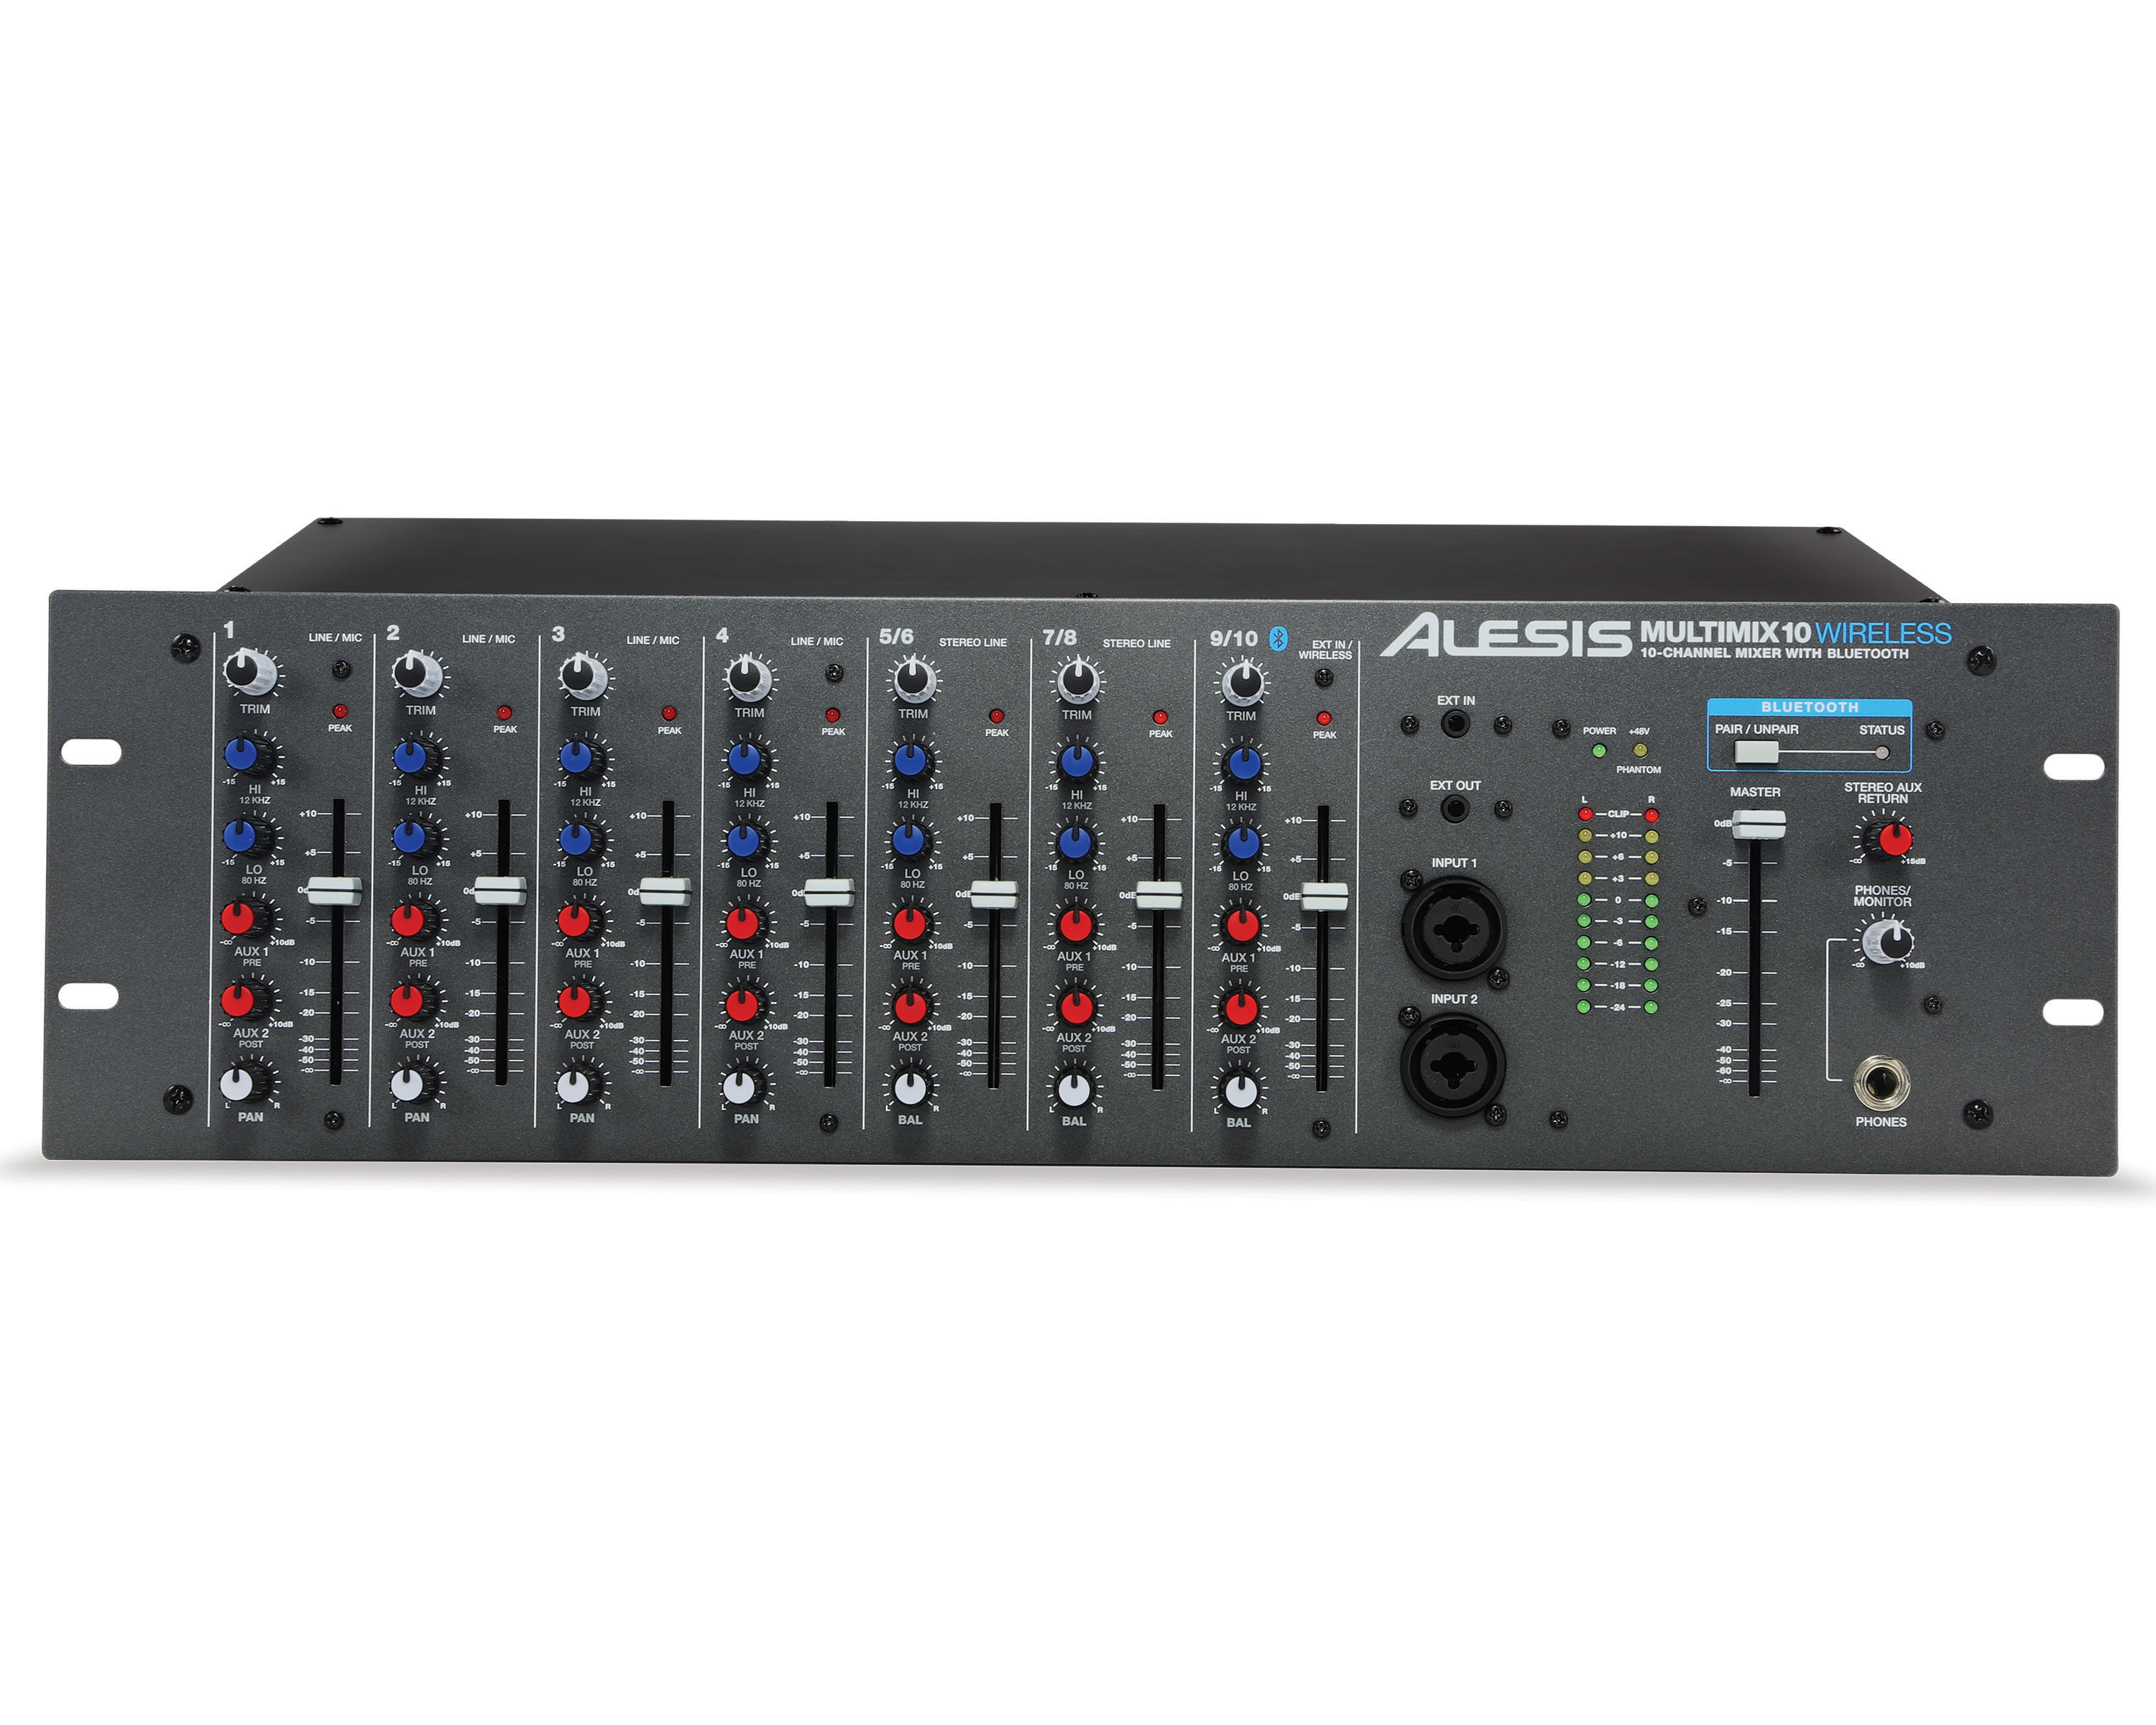 Alesis MULTIMIX 10 WIRELESS 10-Channel Mixer With Bluetooth Wireless